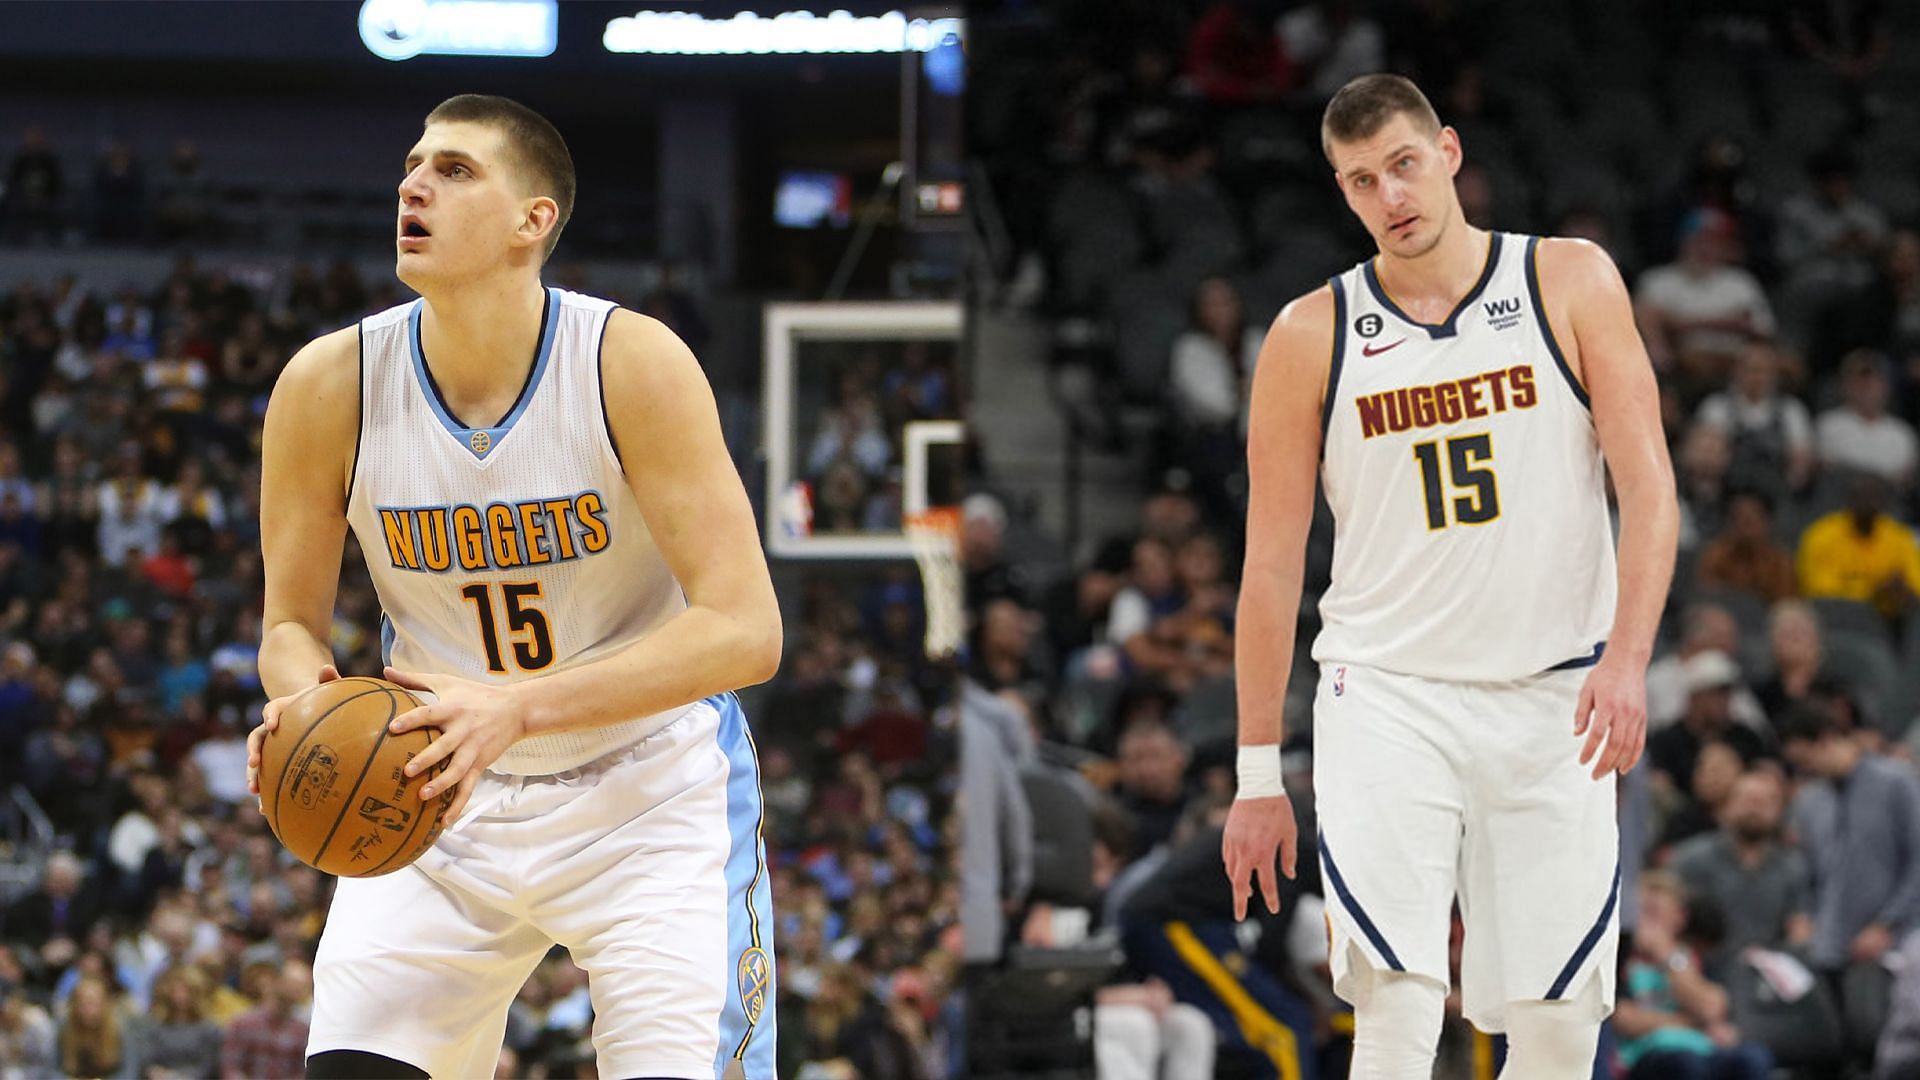 Jokic has been among the best NBA players for the last few years